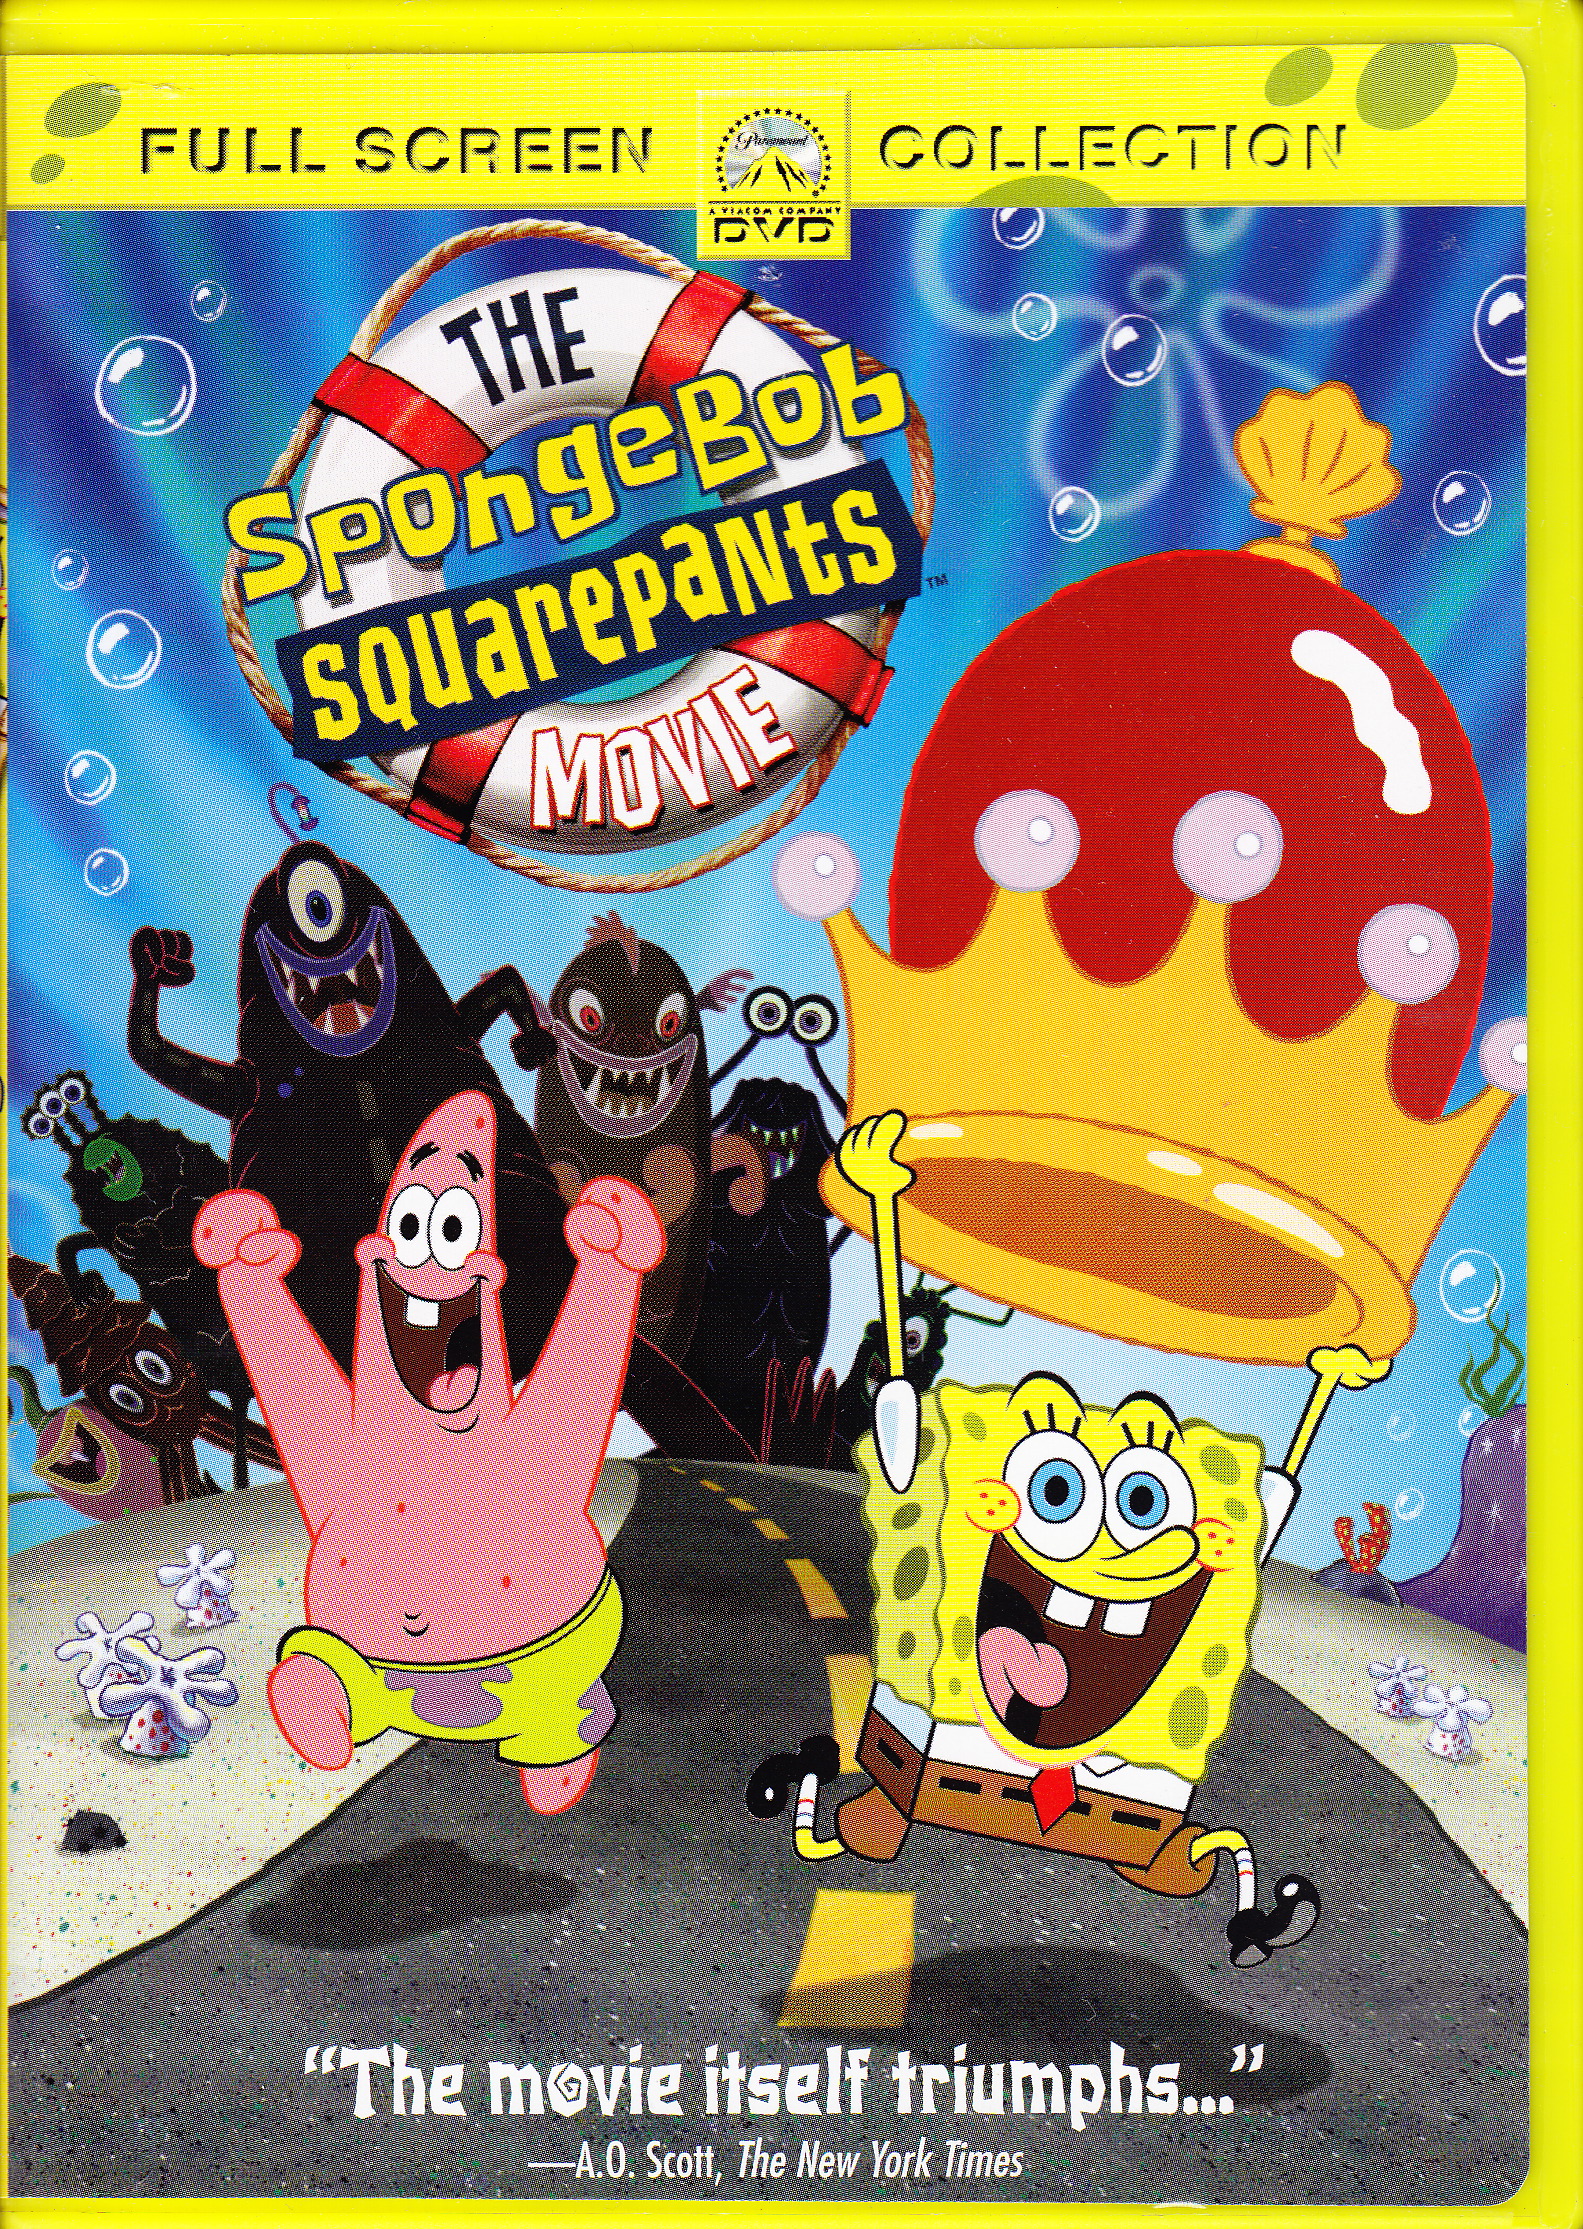 The SpongeBob SquarePants Movie Game. 9970 likes · 152 talking about this.  The SpongeBob SquarePants Movie is a video game based on the film of the.